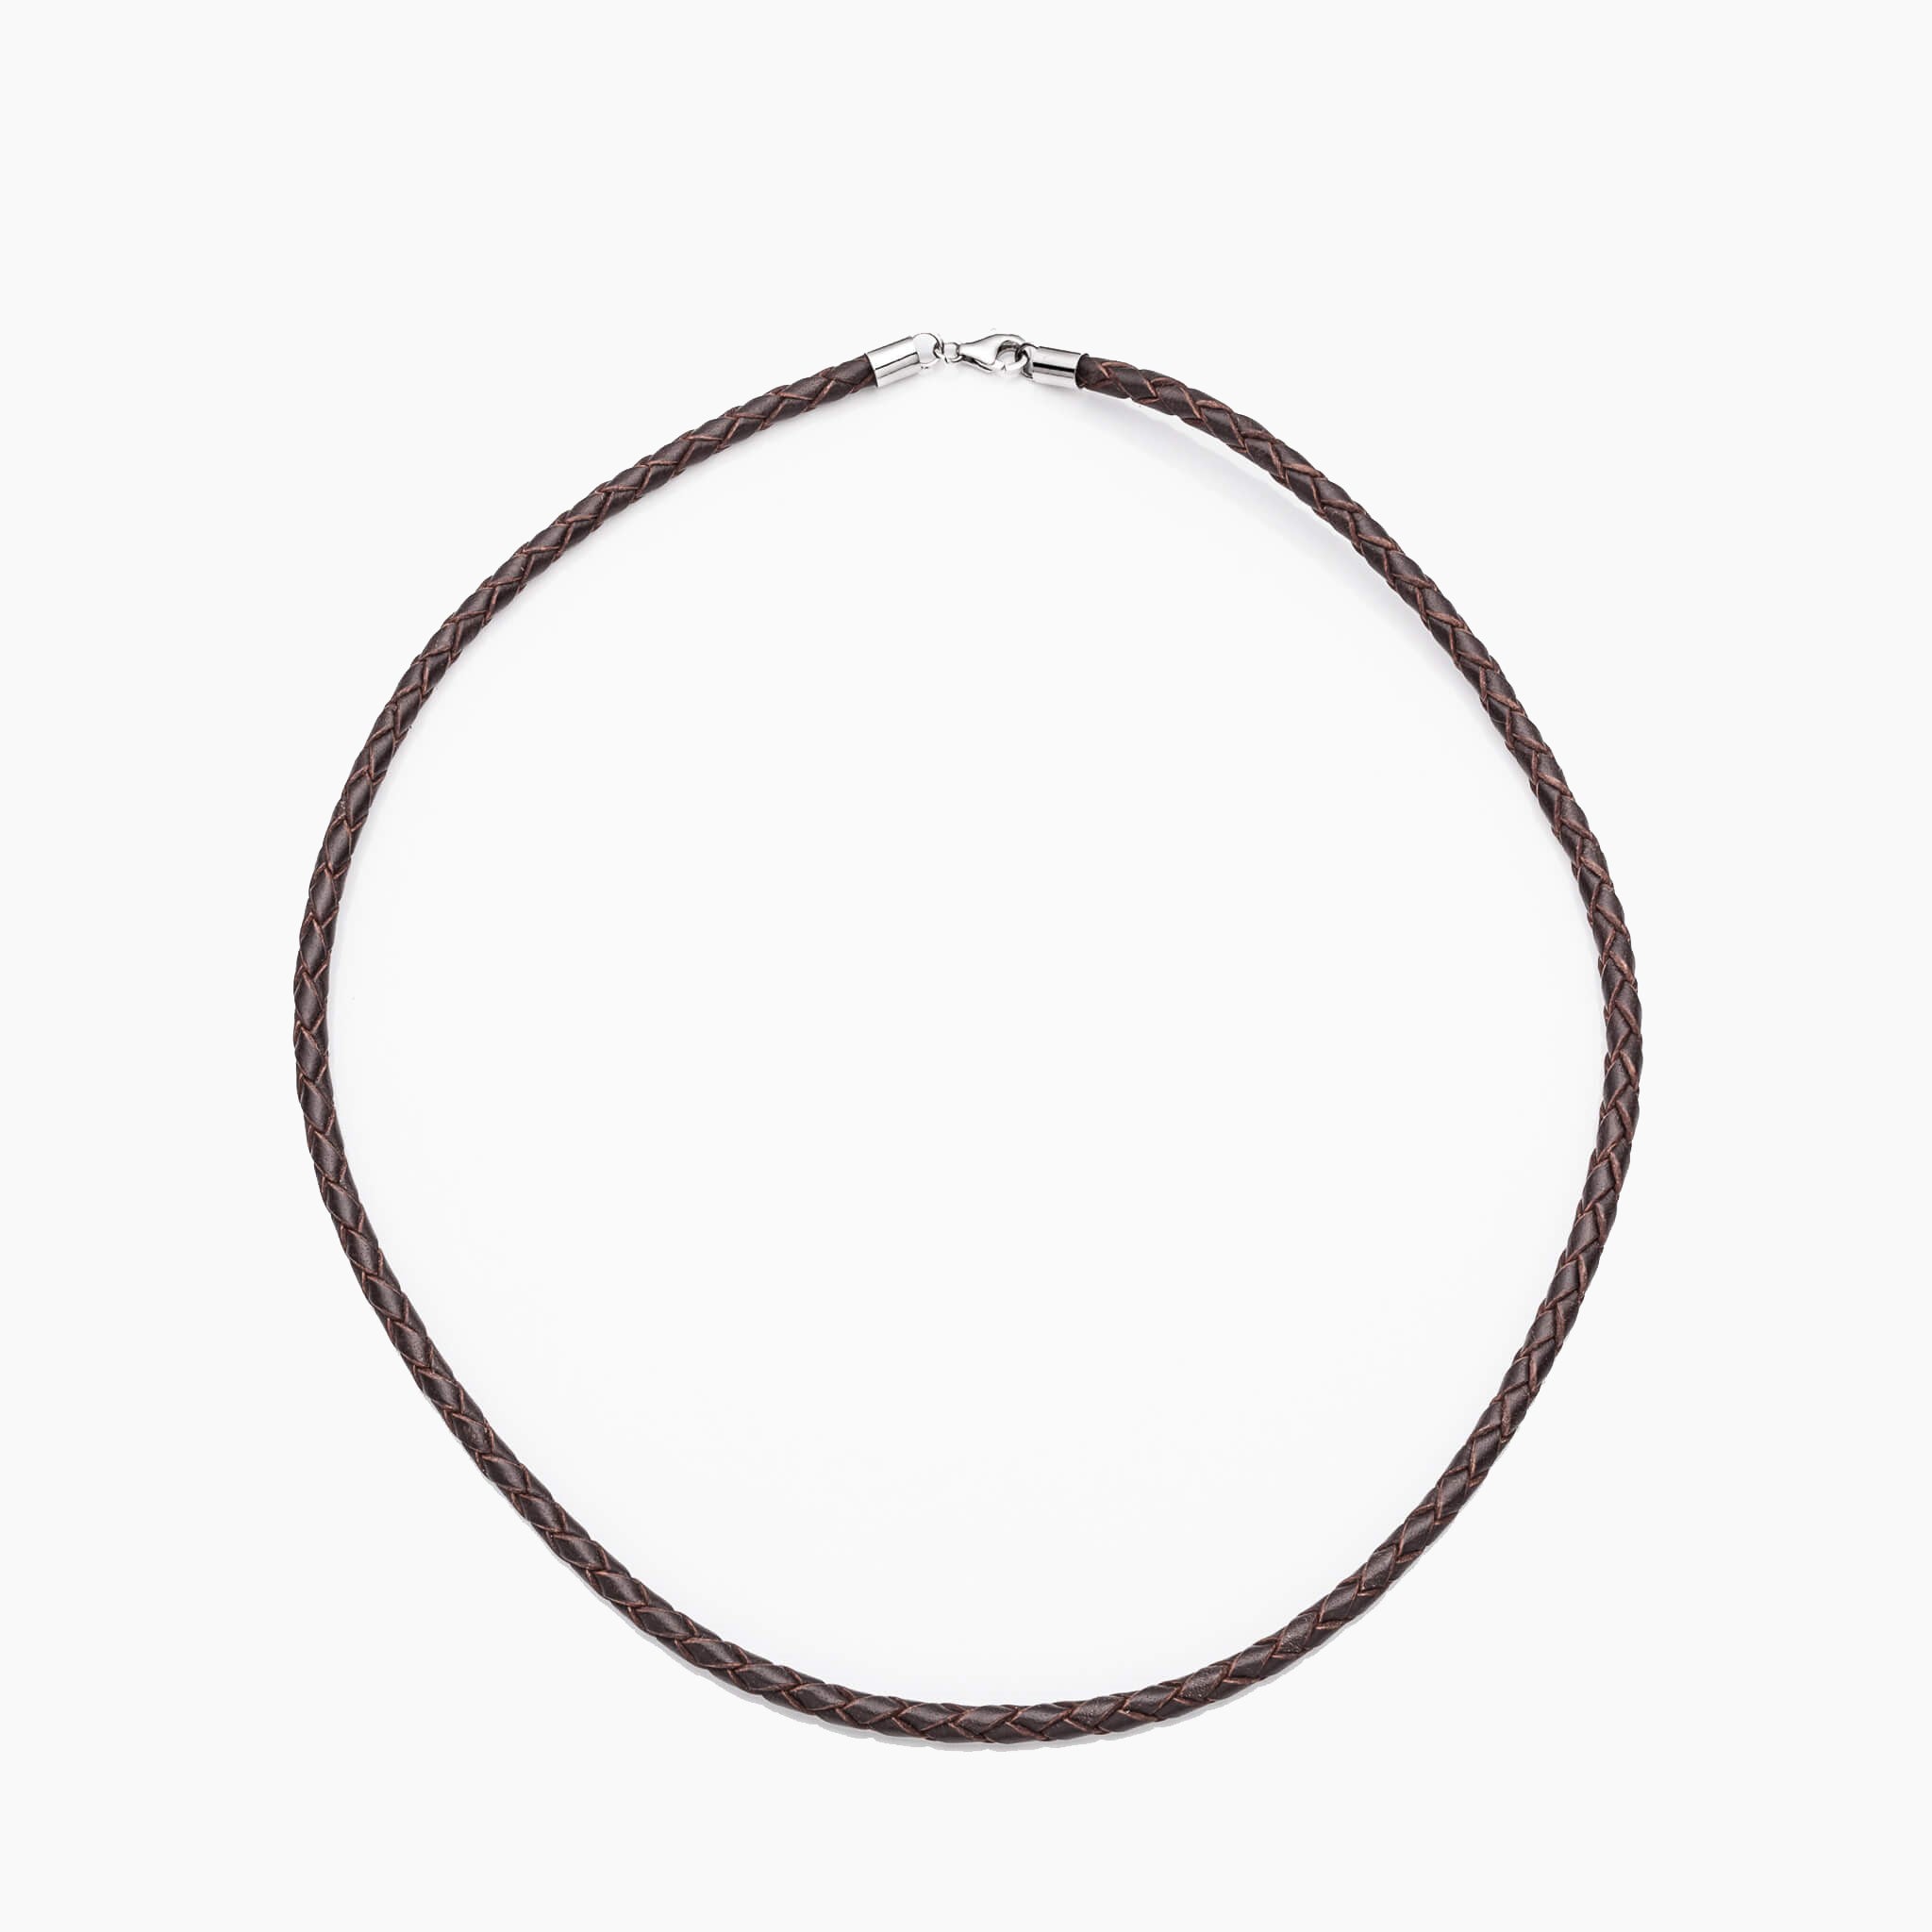 Braided Leather Cord Necklace Brown 20 inches (51cm)